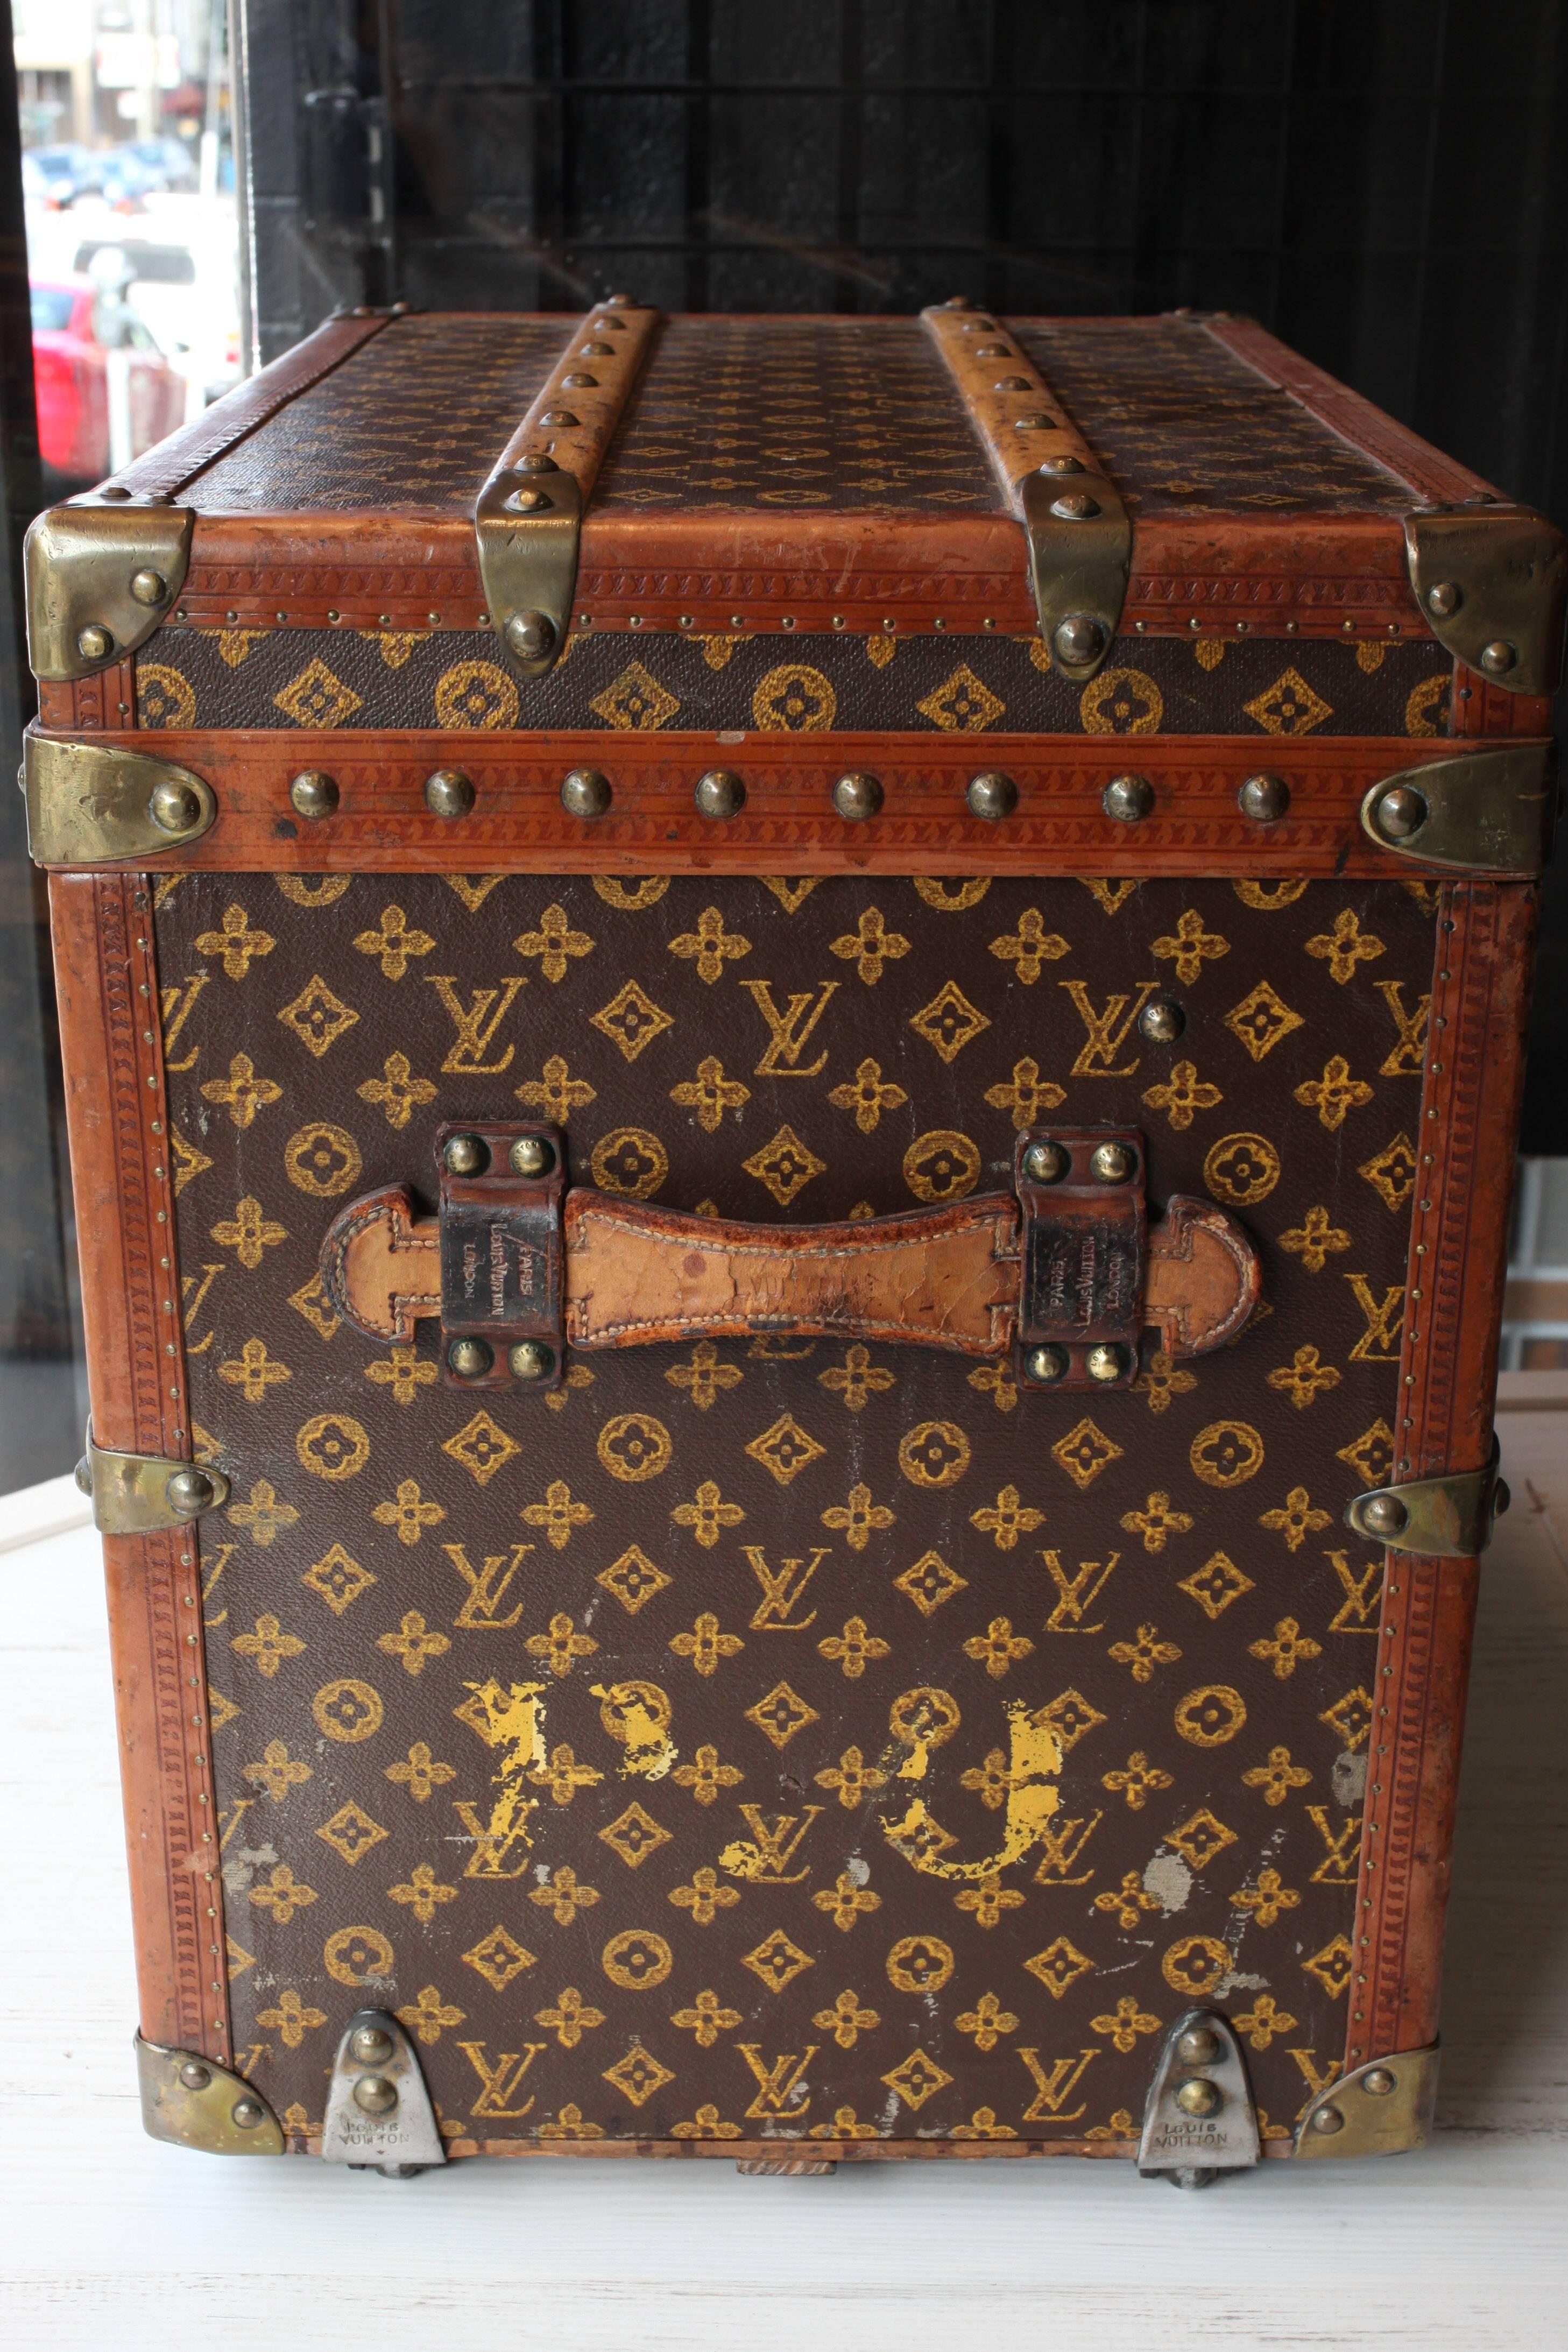 This is a vintage Louis Vuitton shoe trunk from around 1950. The owner purchased this from an antique store in London during the 1970s.  This trunk has great character and is a unique piece in the trunk collection.  Rarely do you see these types of